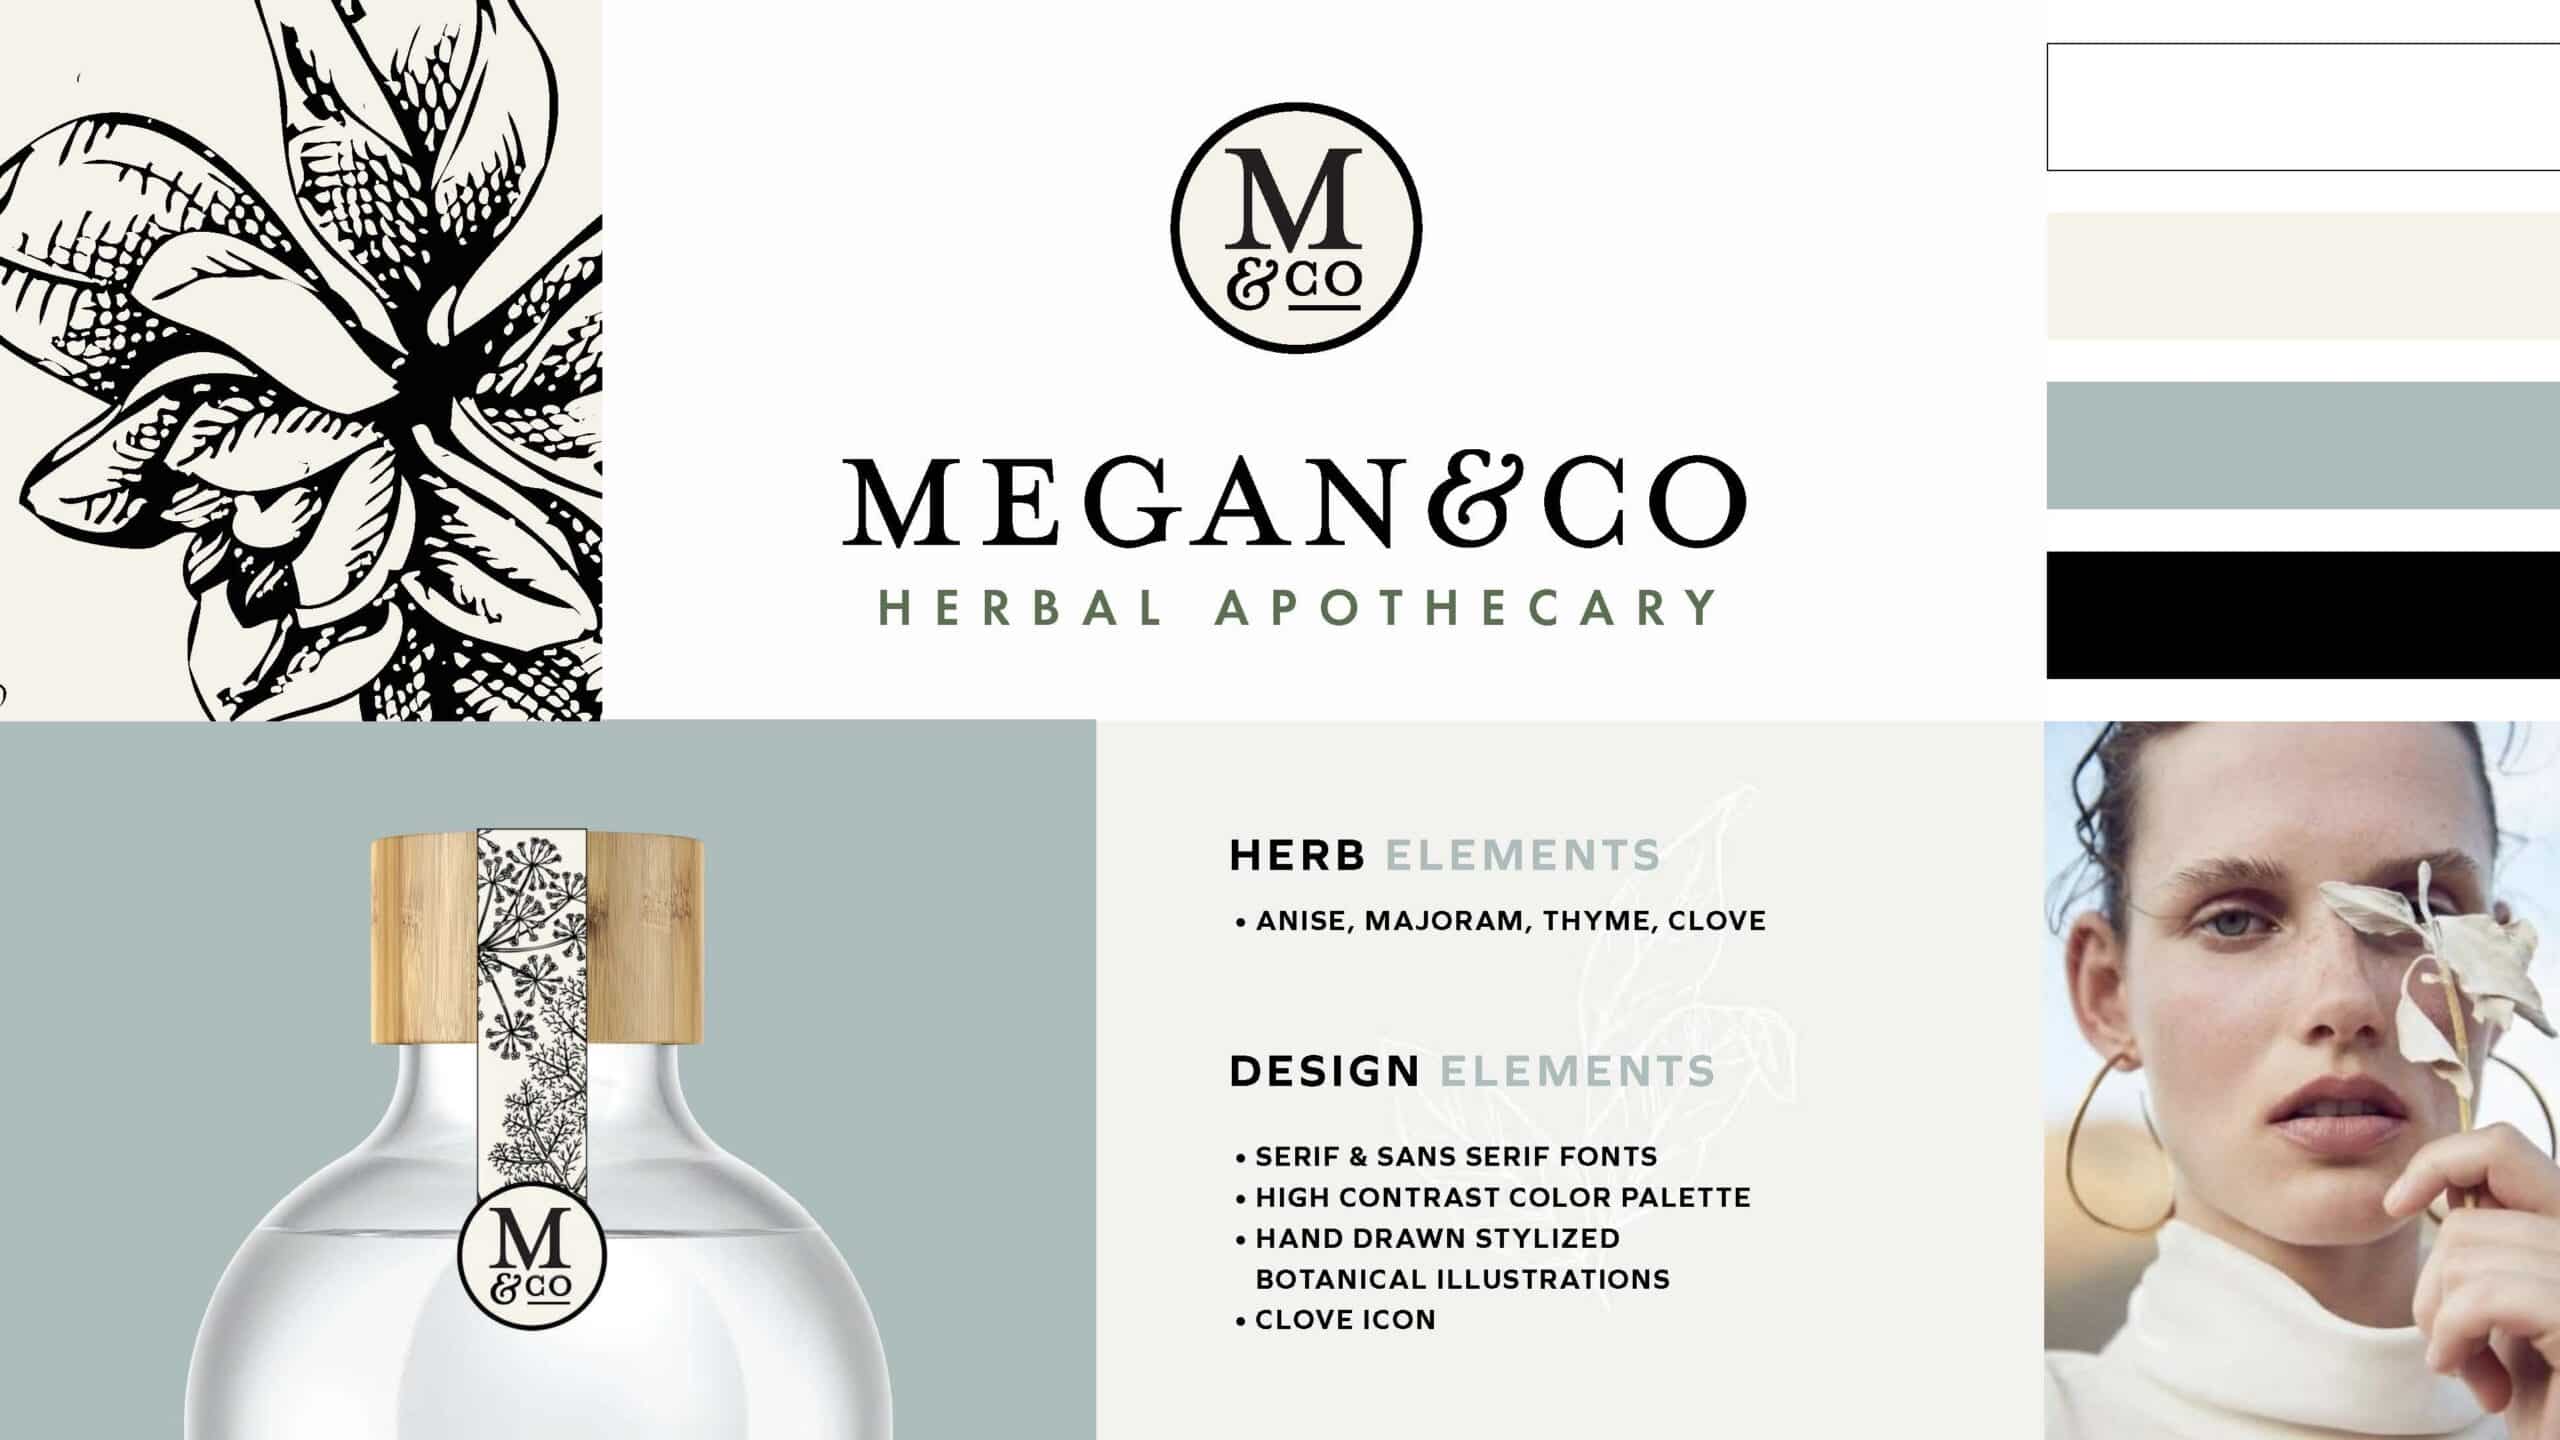 Megan Co the Herbal Apothecary brand presentation with logo, illustrations, blue earthy color palette, and packaging label on a glass bottle and bamboo lid.